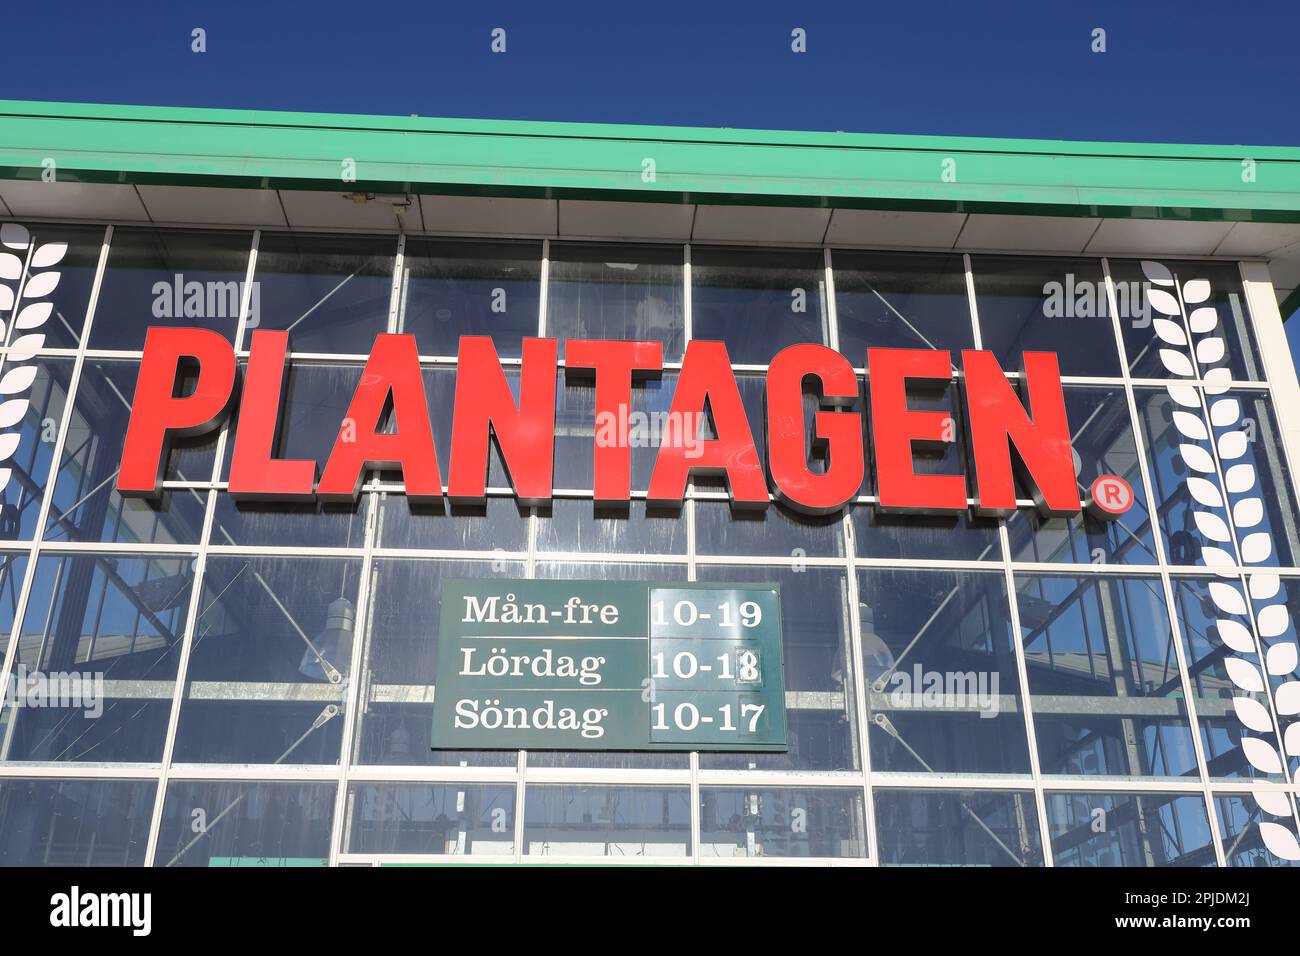 Sodertalje, Sweden - April 1, 2023: Plantagen is a retail chain selling plants and garden products in the Nordic countries. Stock Photo